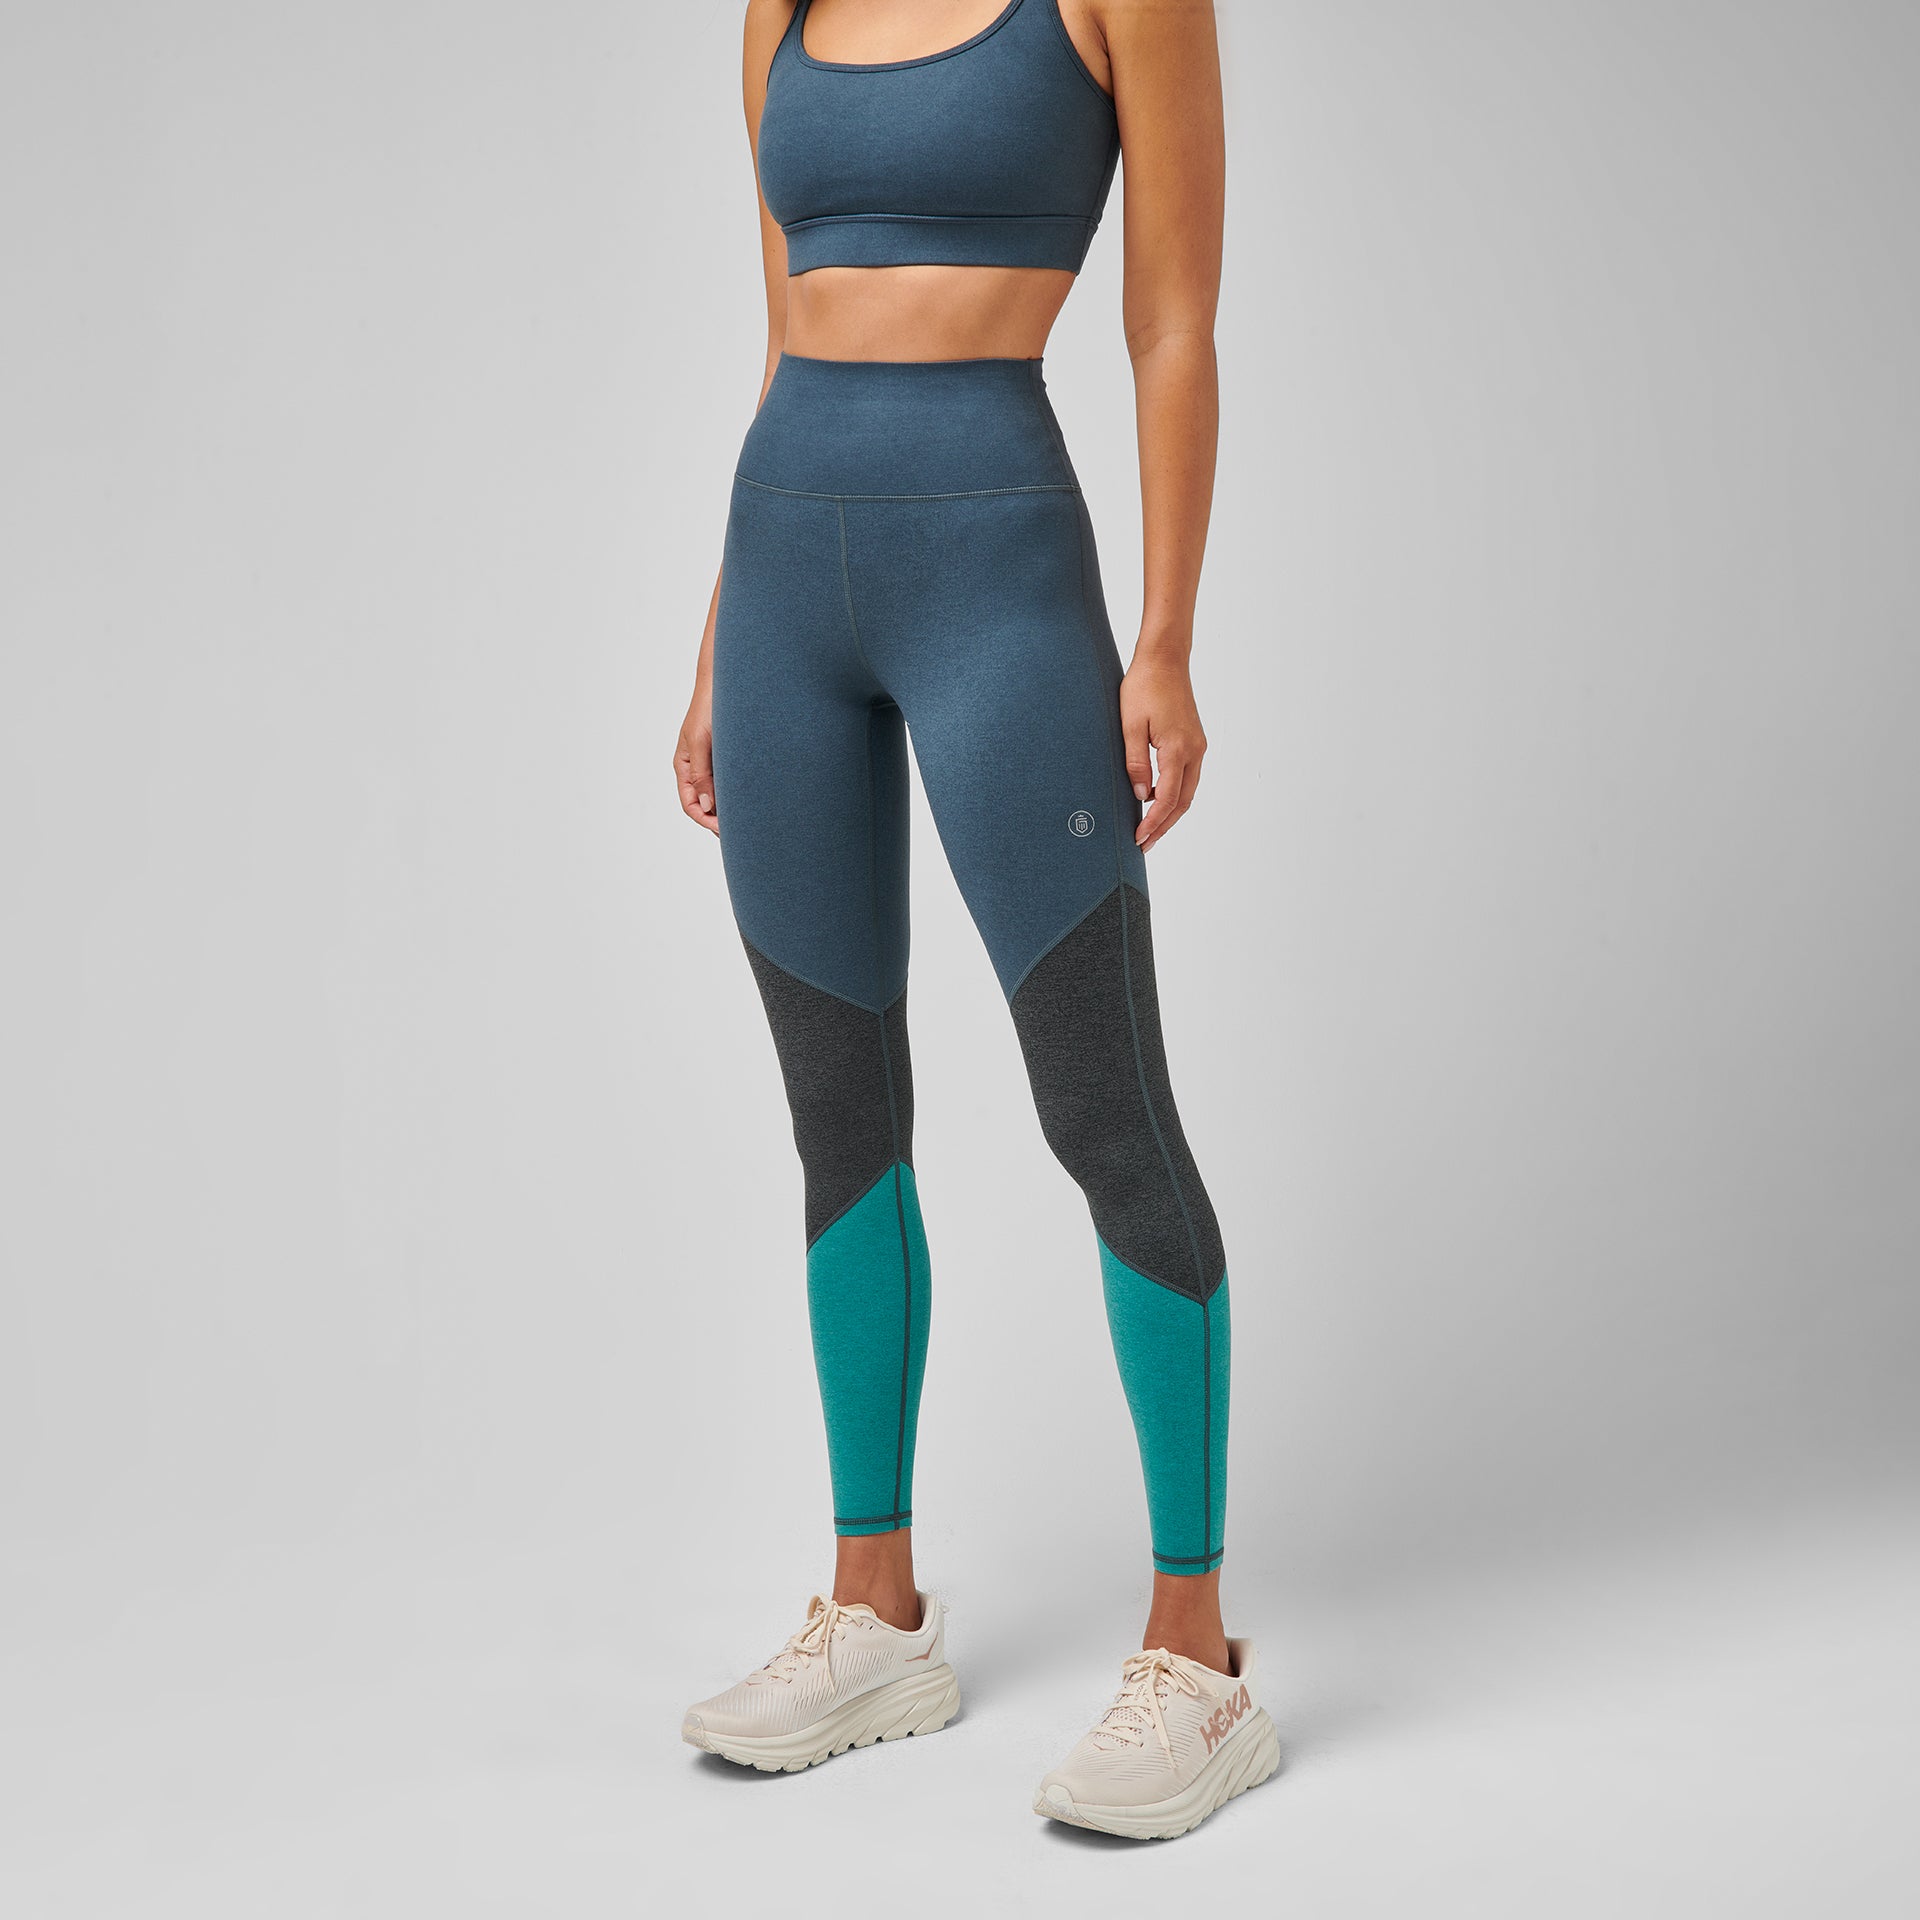 The best gym and sports leggings we've tested - Saga Exceptional